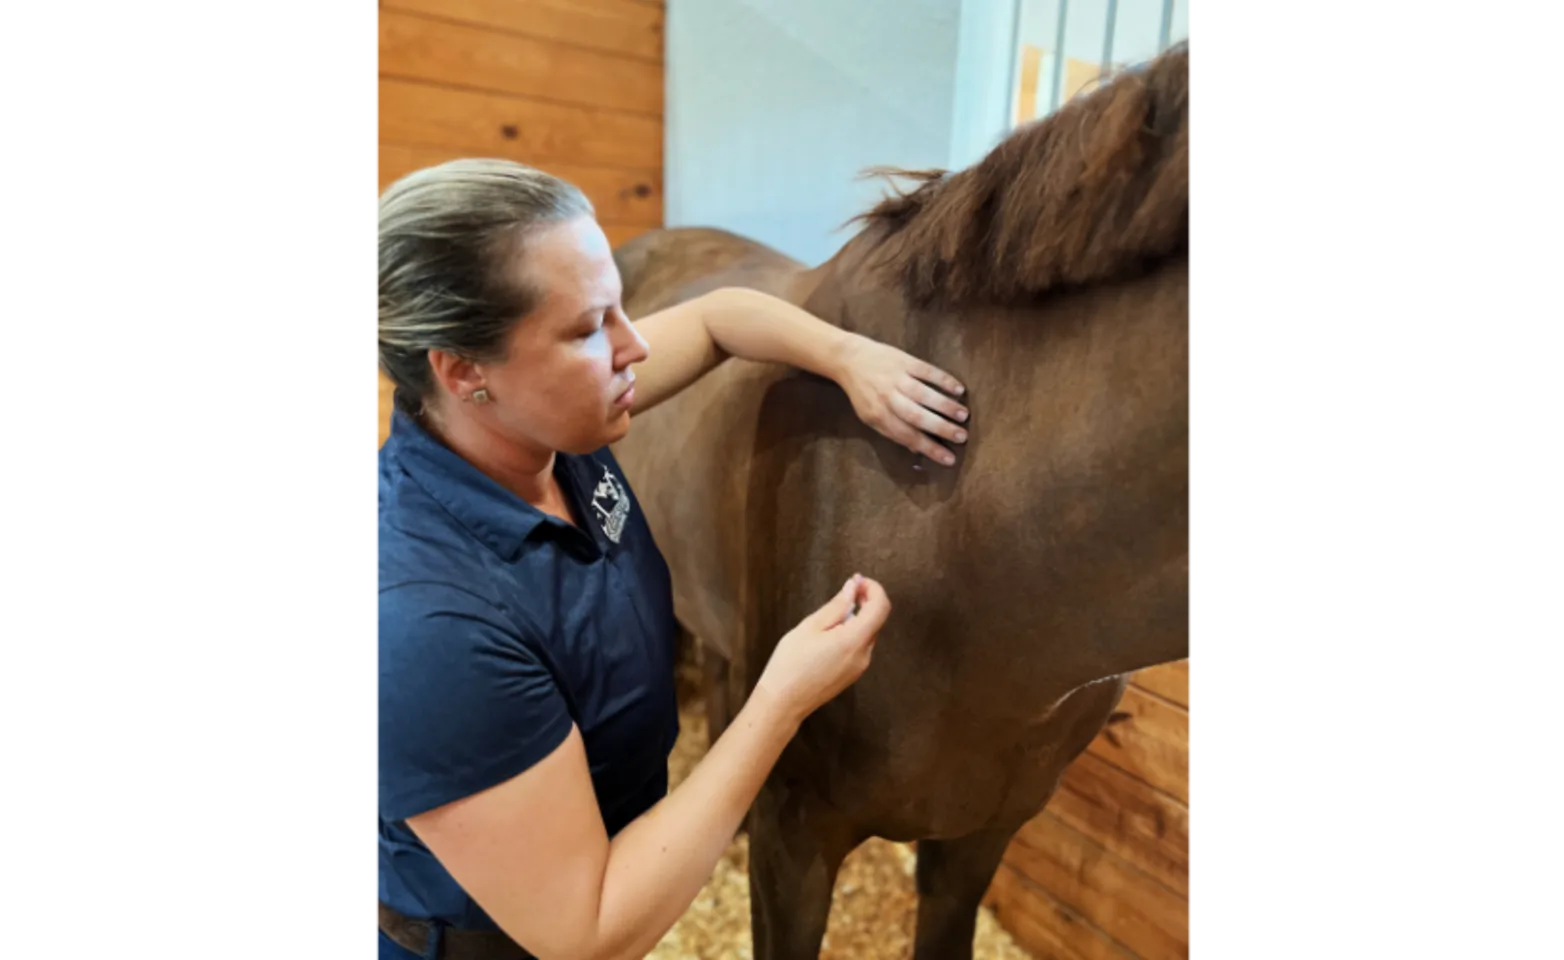 Staff performing acupuncture on a brown horse